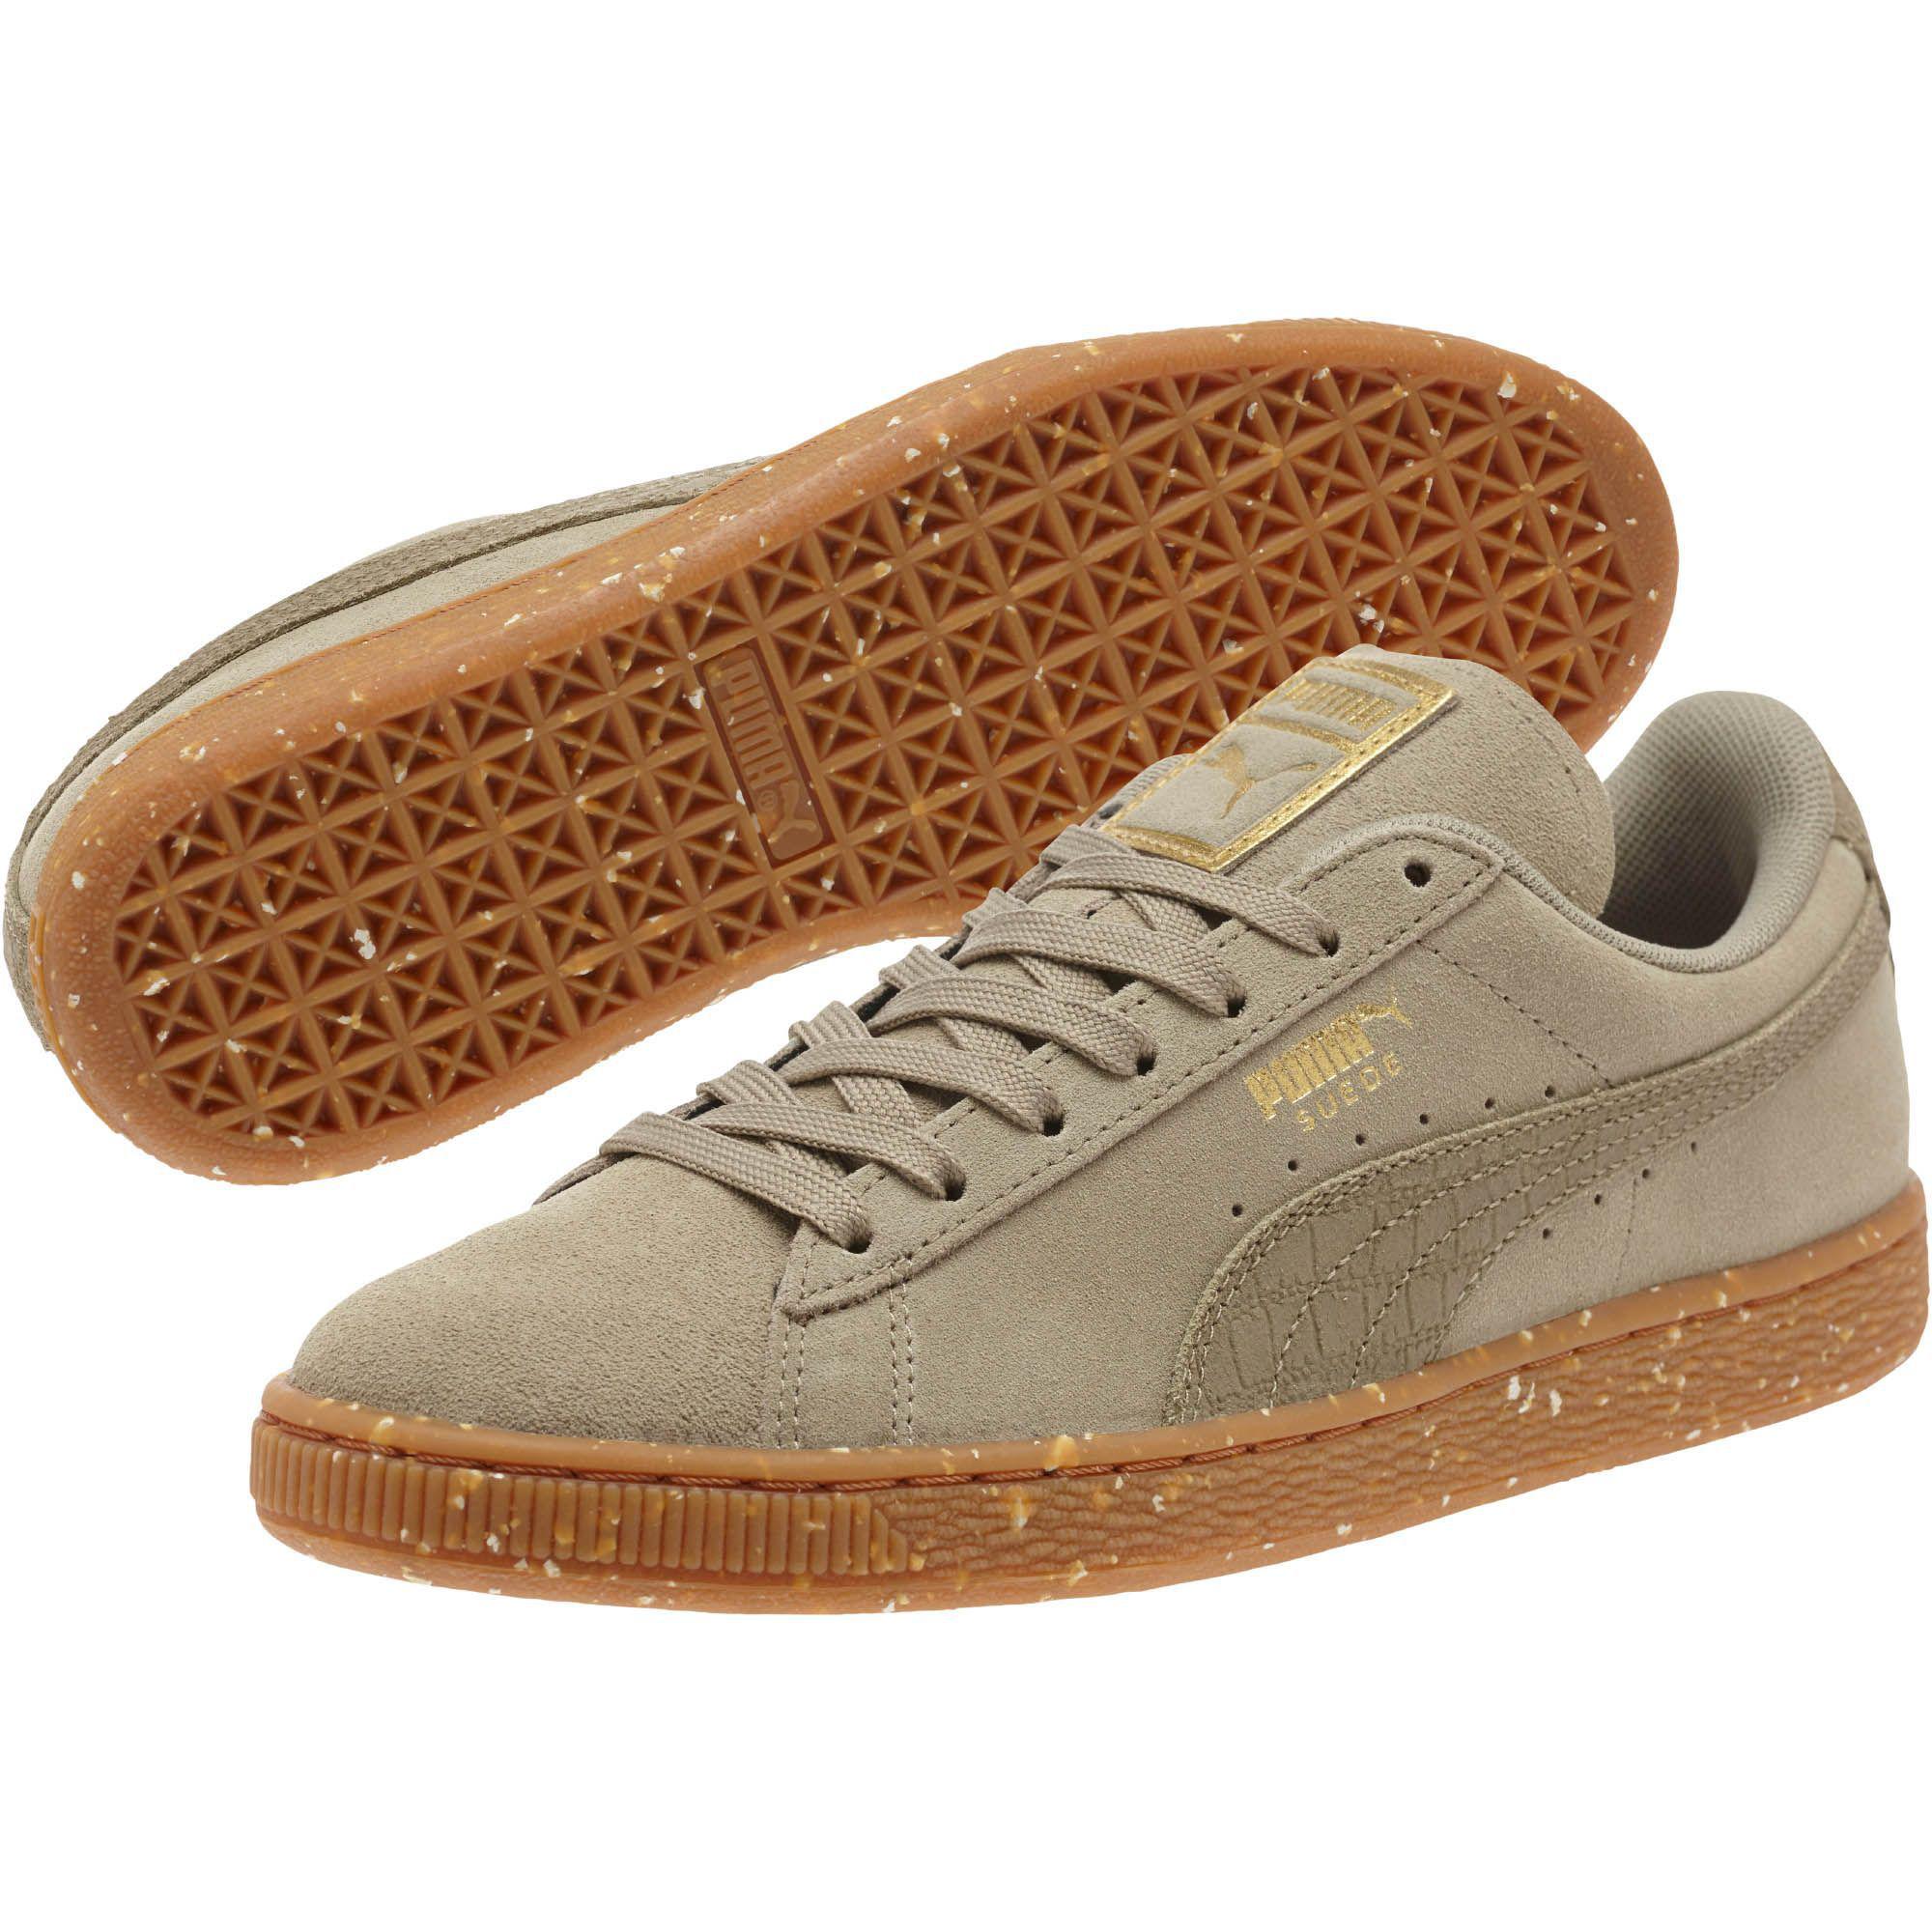 PUMA Suede Classic Ft Women's Sneakers 